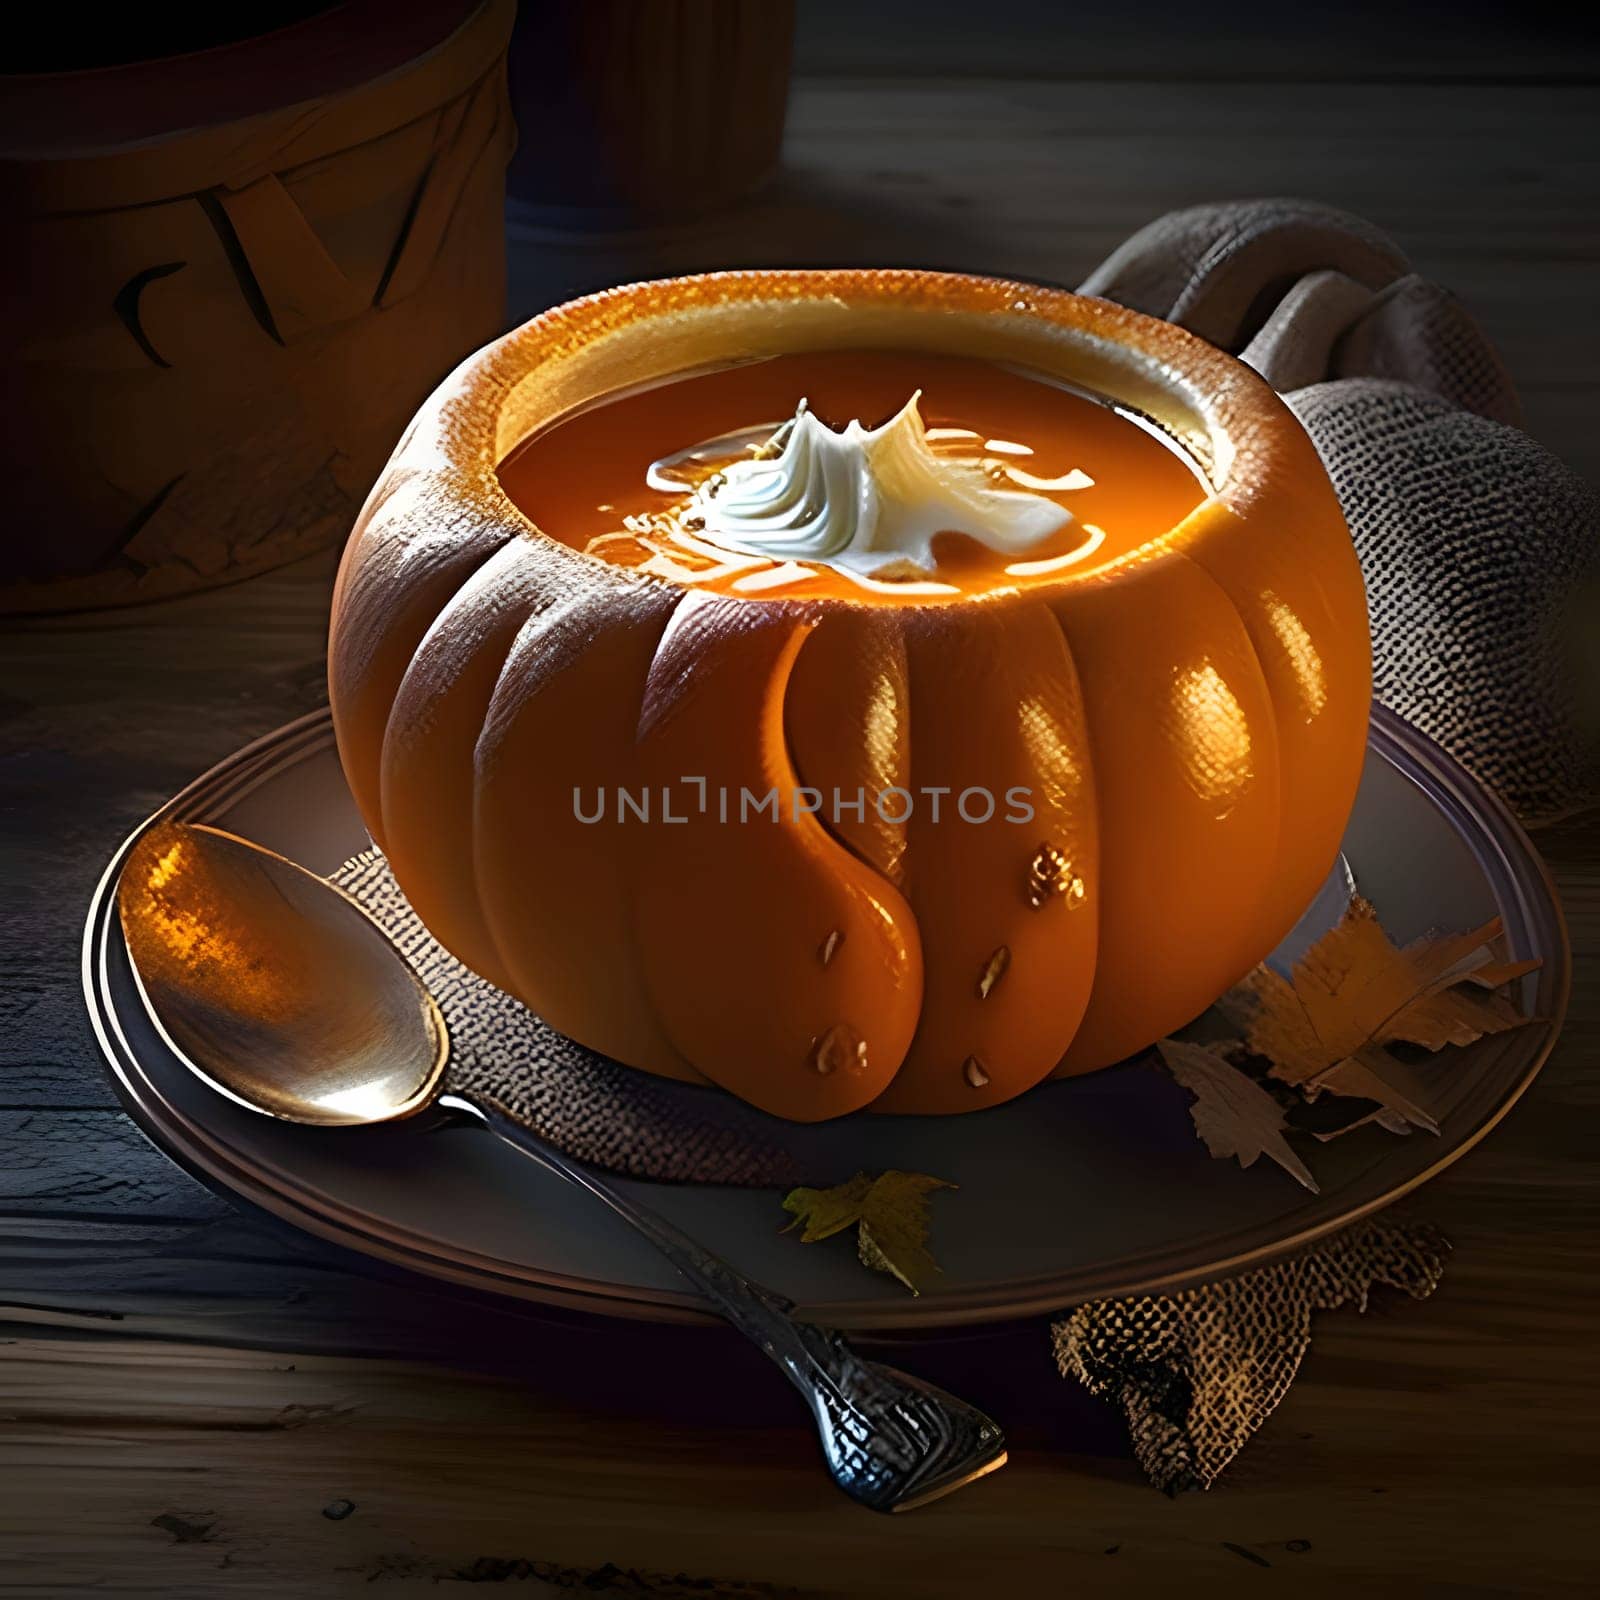 Pumpkin soup with cream in a pumpkin bowl on a plate. Pumpkin as a dish of thanksgiving for the harvest. The atmosphere of joy and celebration.